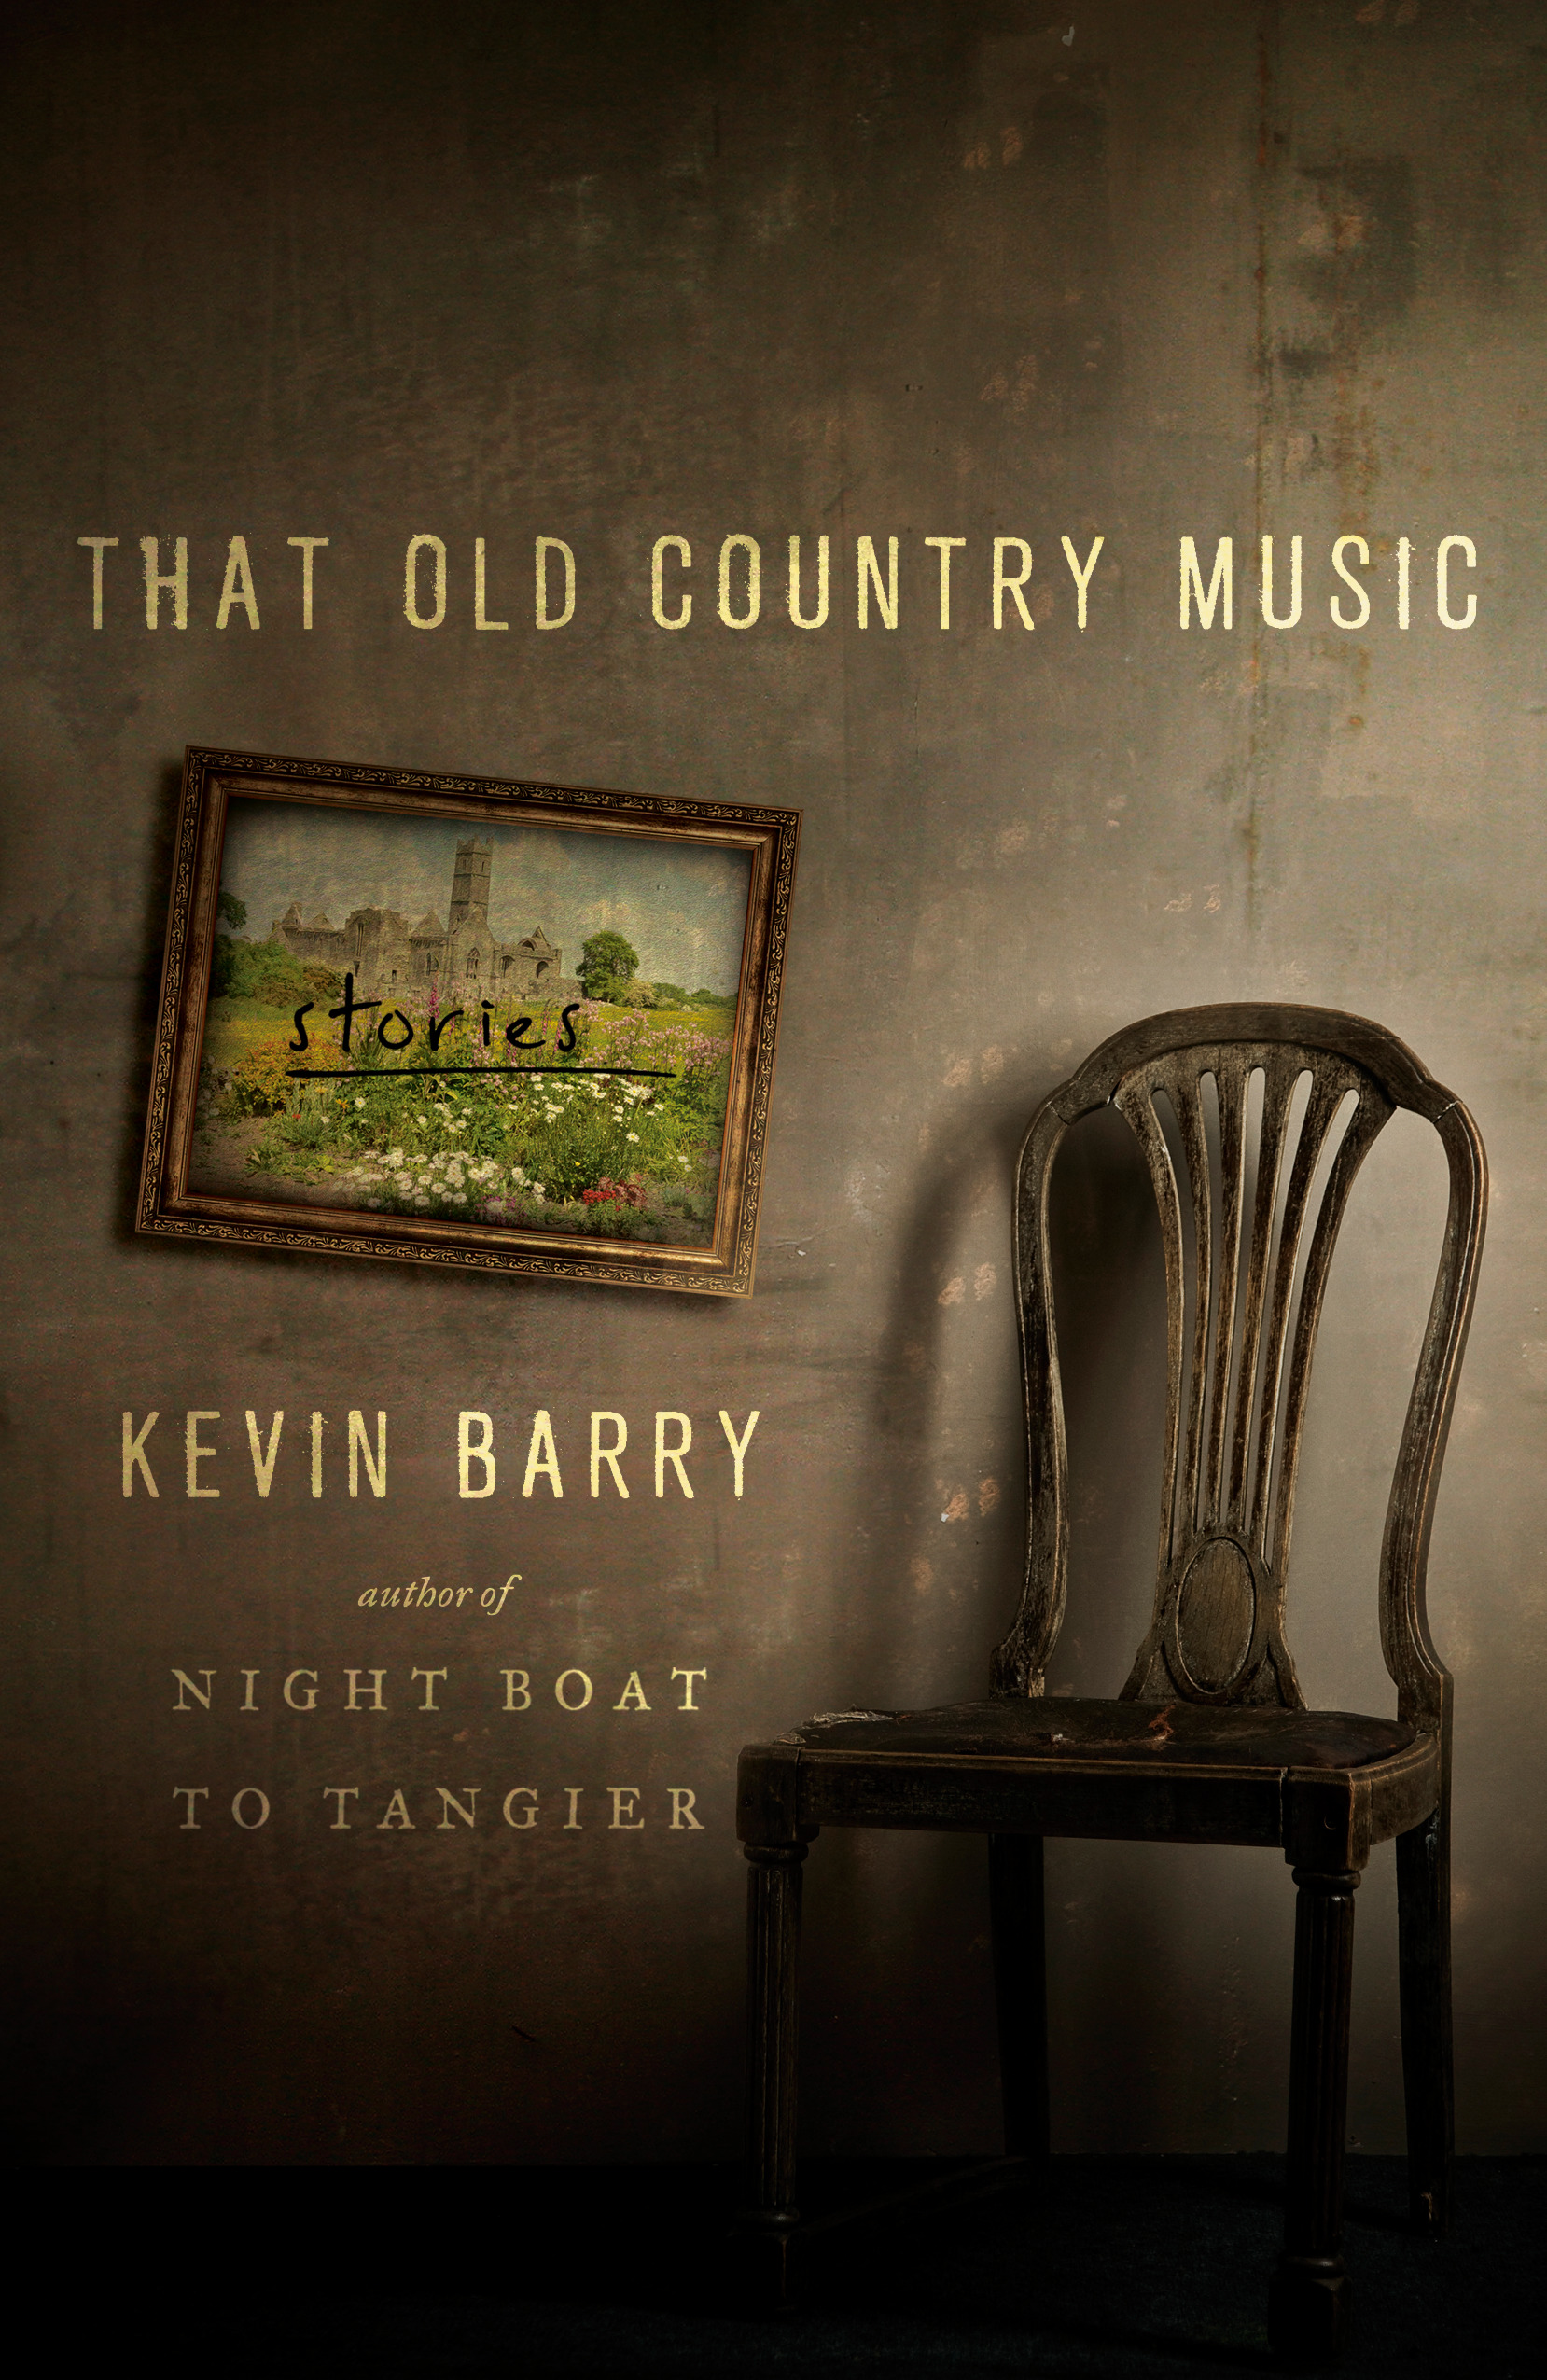 Virtual Book Launch: That Old Country Music by Kevin Barry in conversation with Karan Mahajan